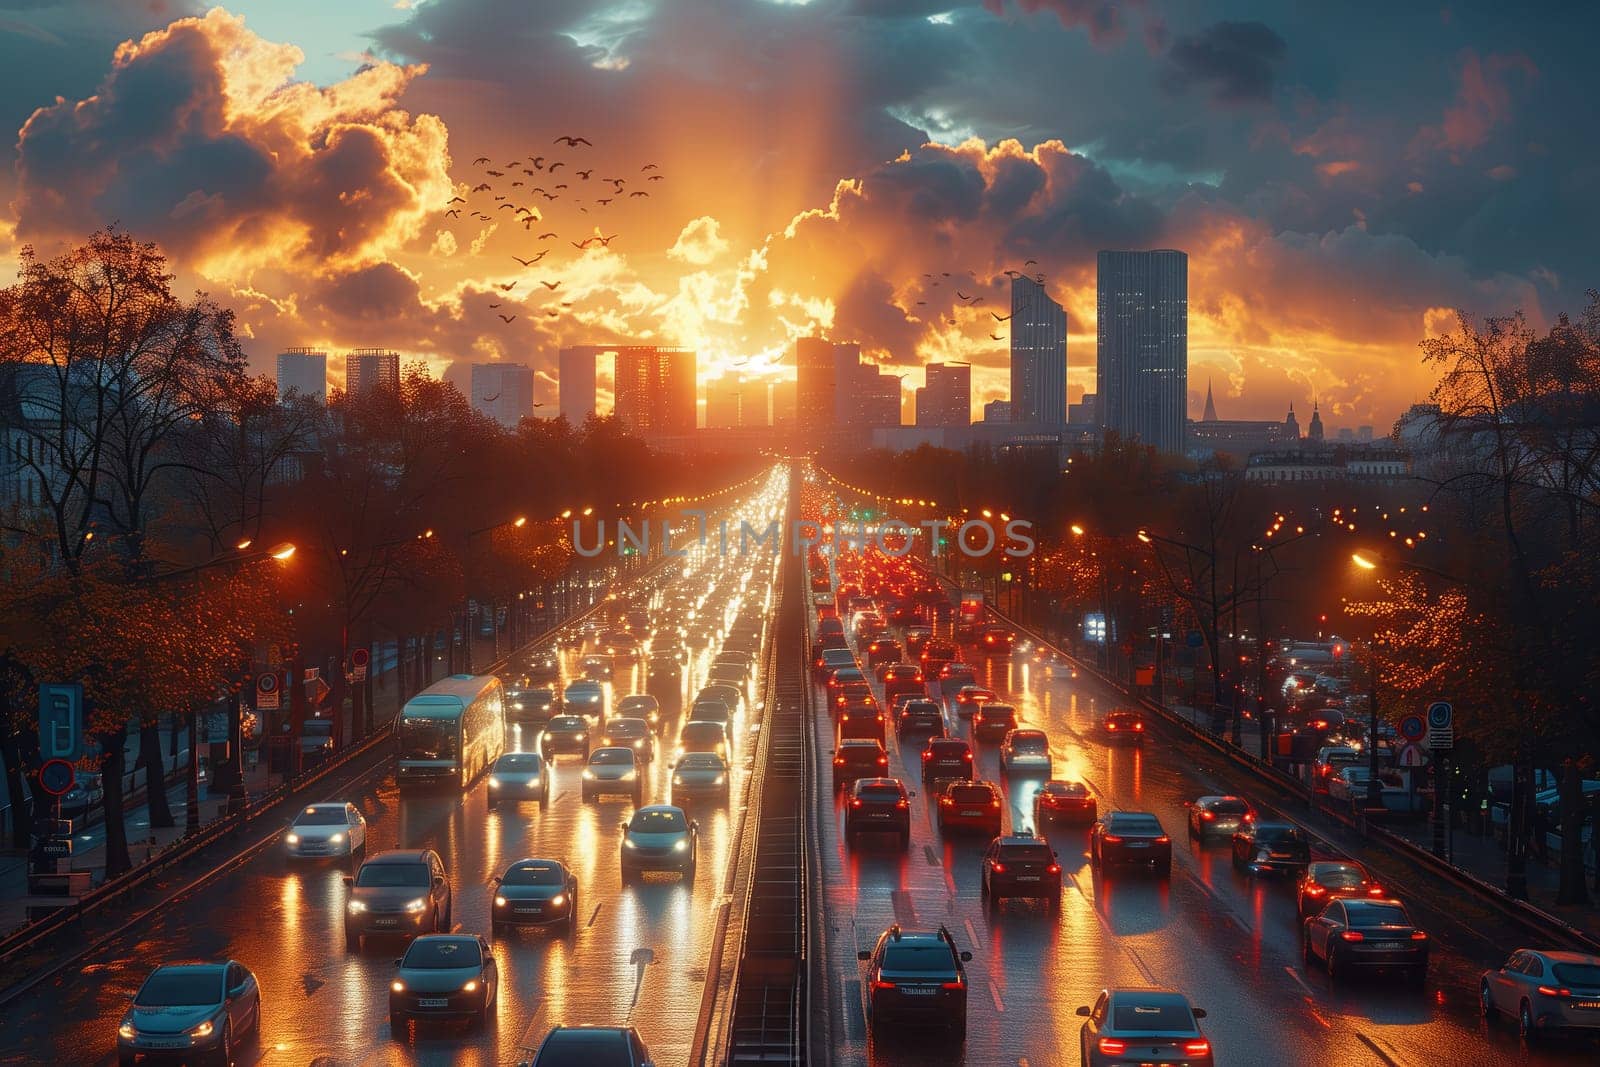 The bustling city street at sunset is filled with cars driving down it, as the sky transforms into a beautiful dusk with towering skyscrapers creating an atmospheric phenomenon in the urban world